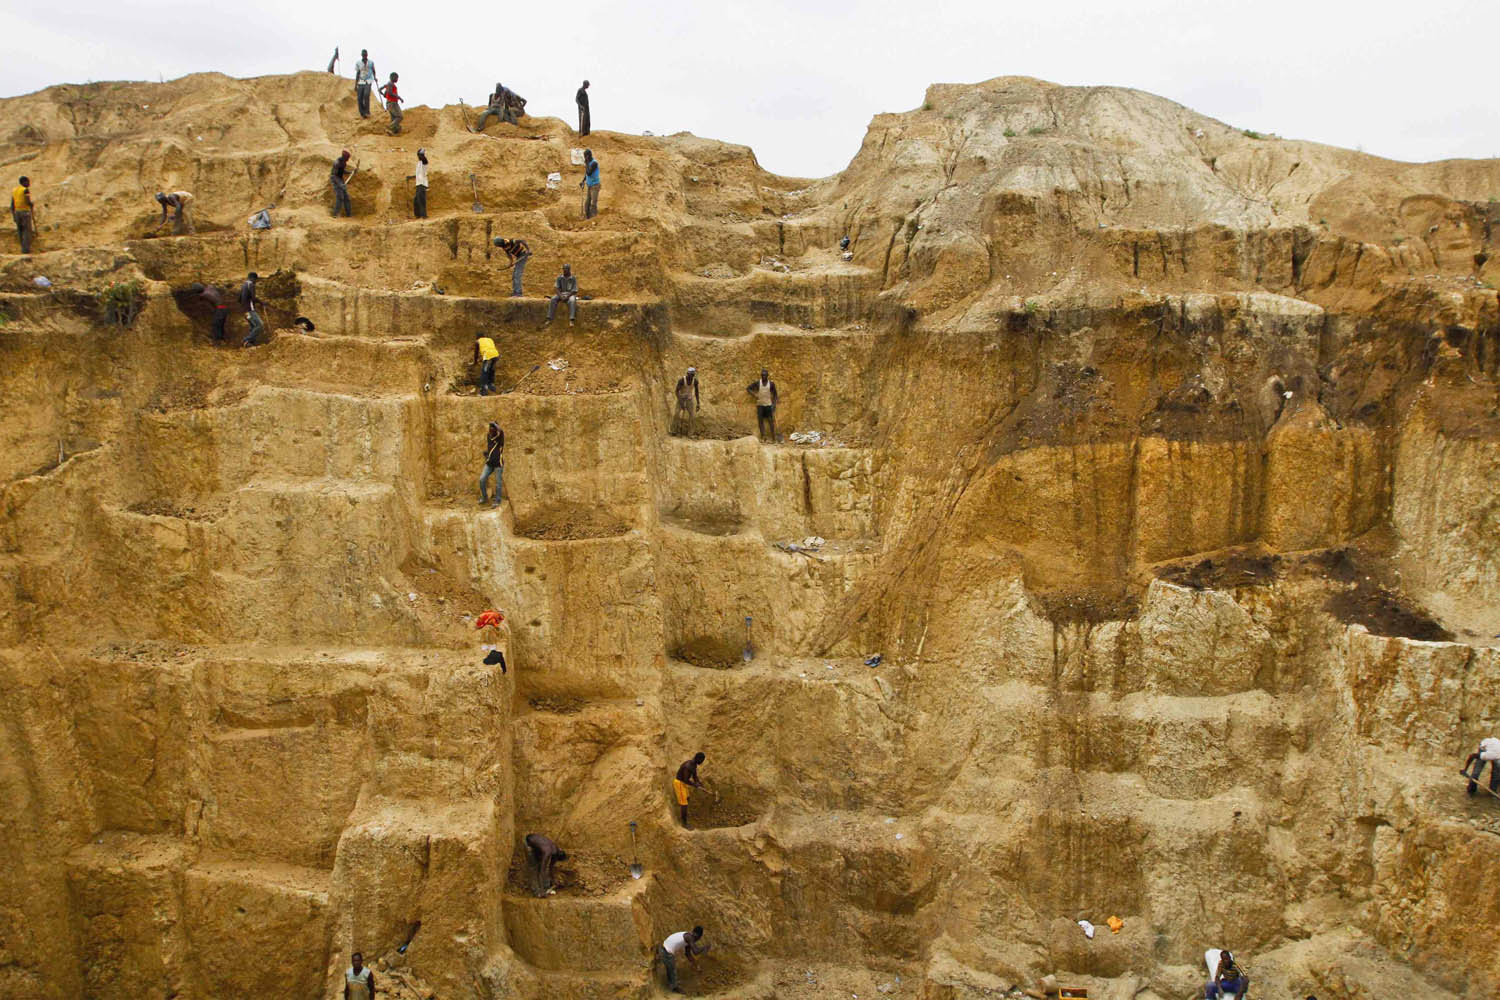 Labourers work at a mine believed to contain gold in Minna